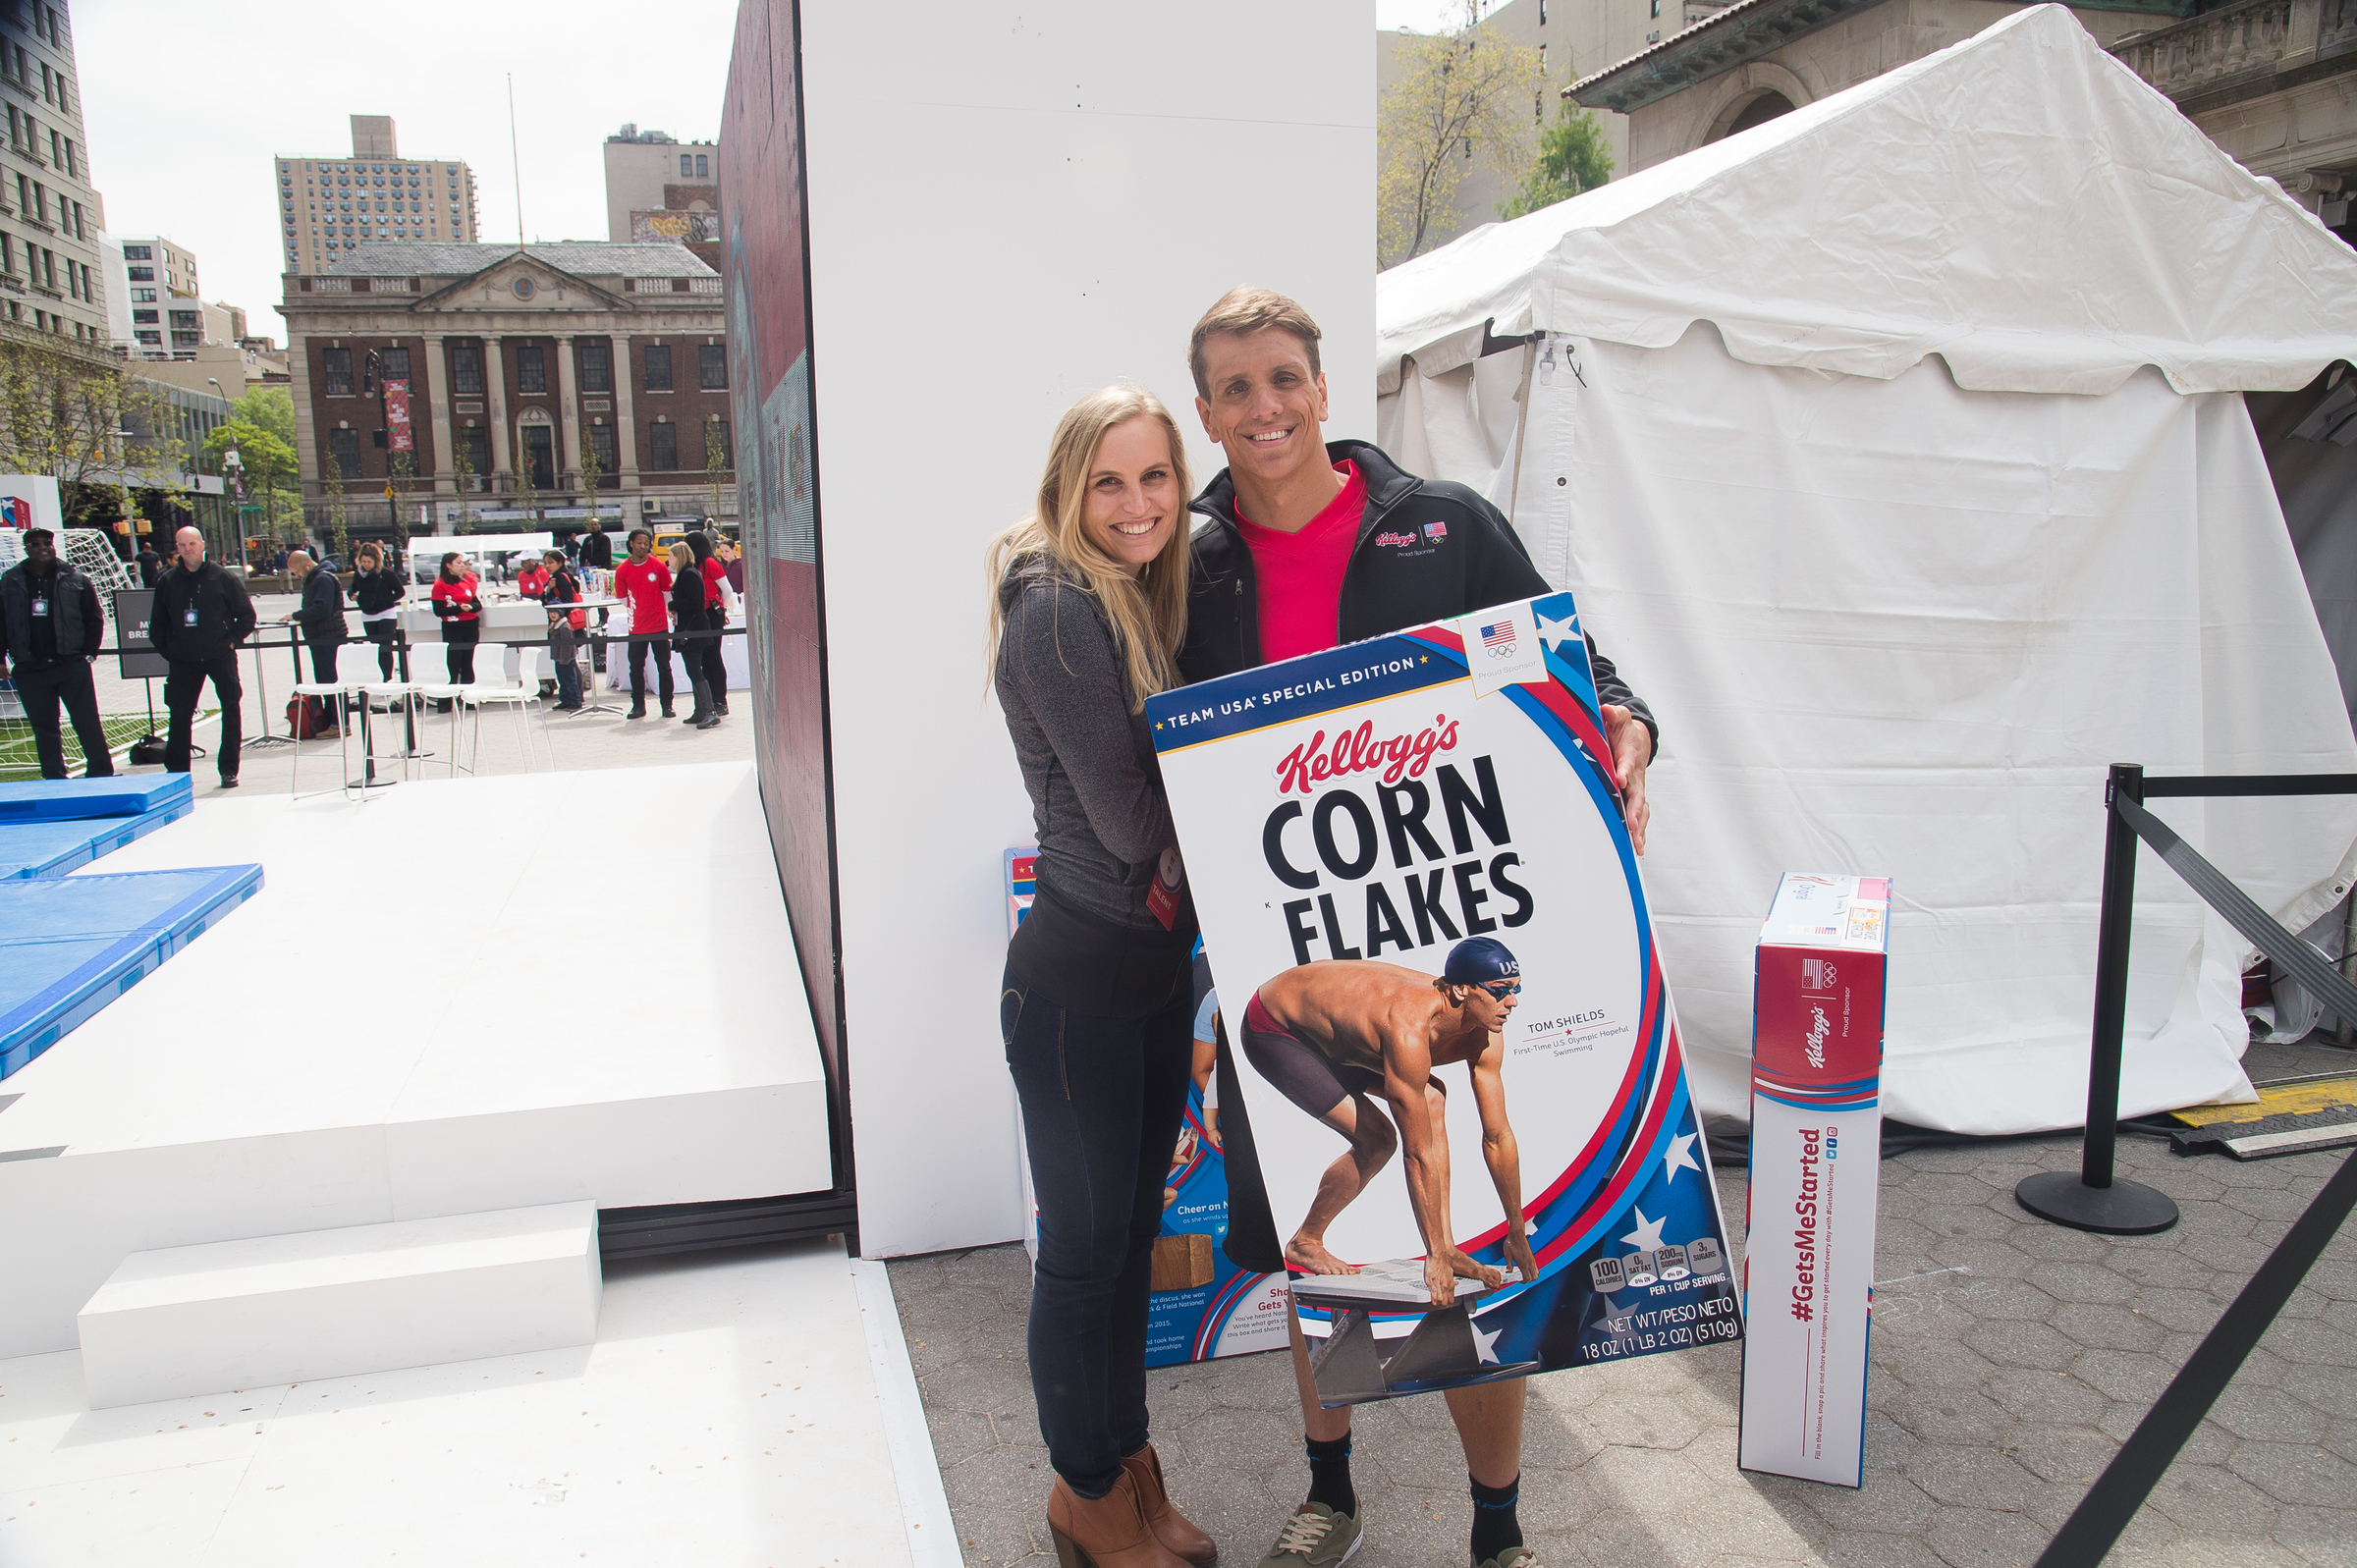 Kellogg's What Gets You Started? event in Union Square on Thursday, April 28, 2016 in New York. (Charles Sykes/AP Images for Kellogg's)